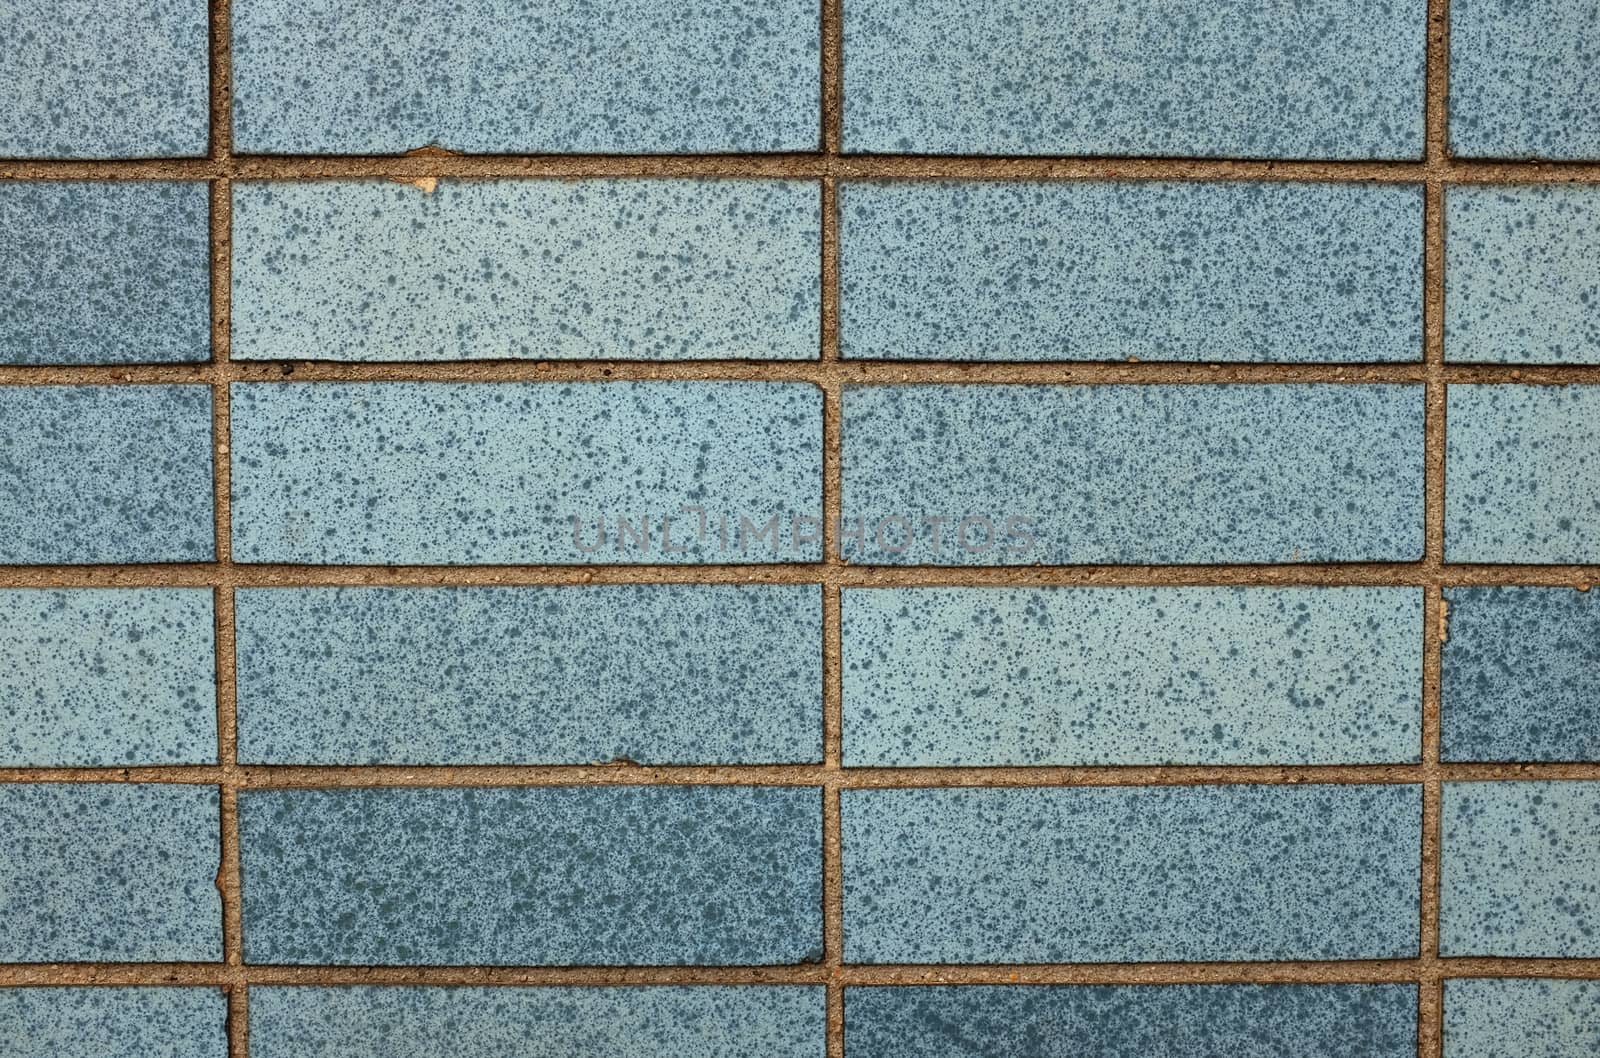 Speckled blue tiles on a wall as an abstract background texture 